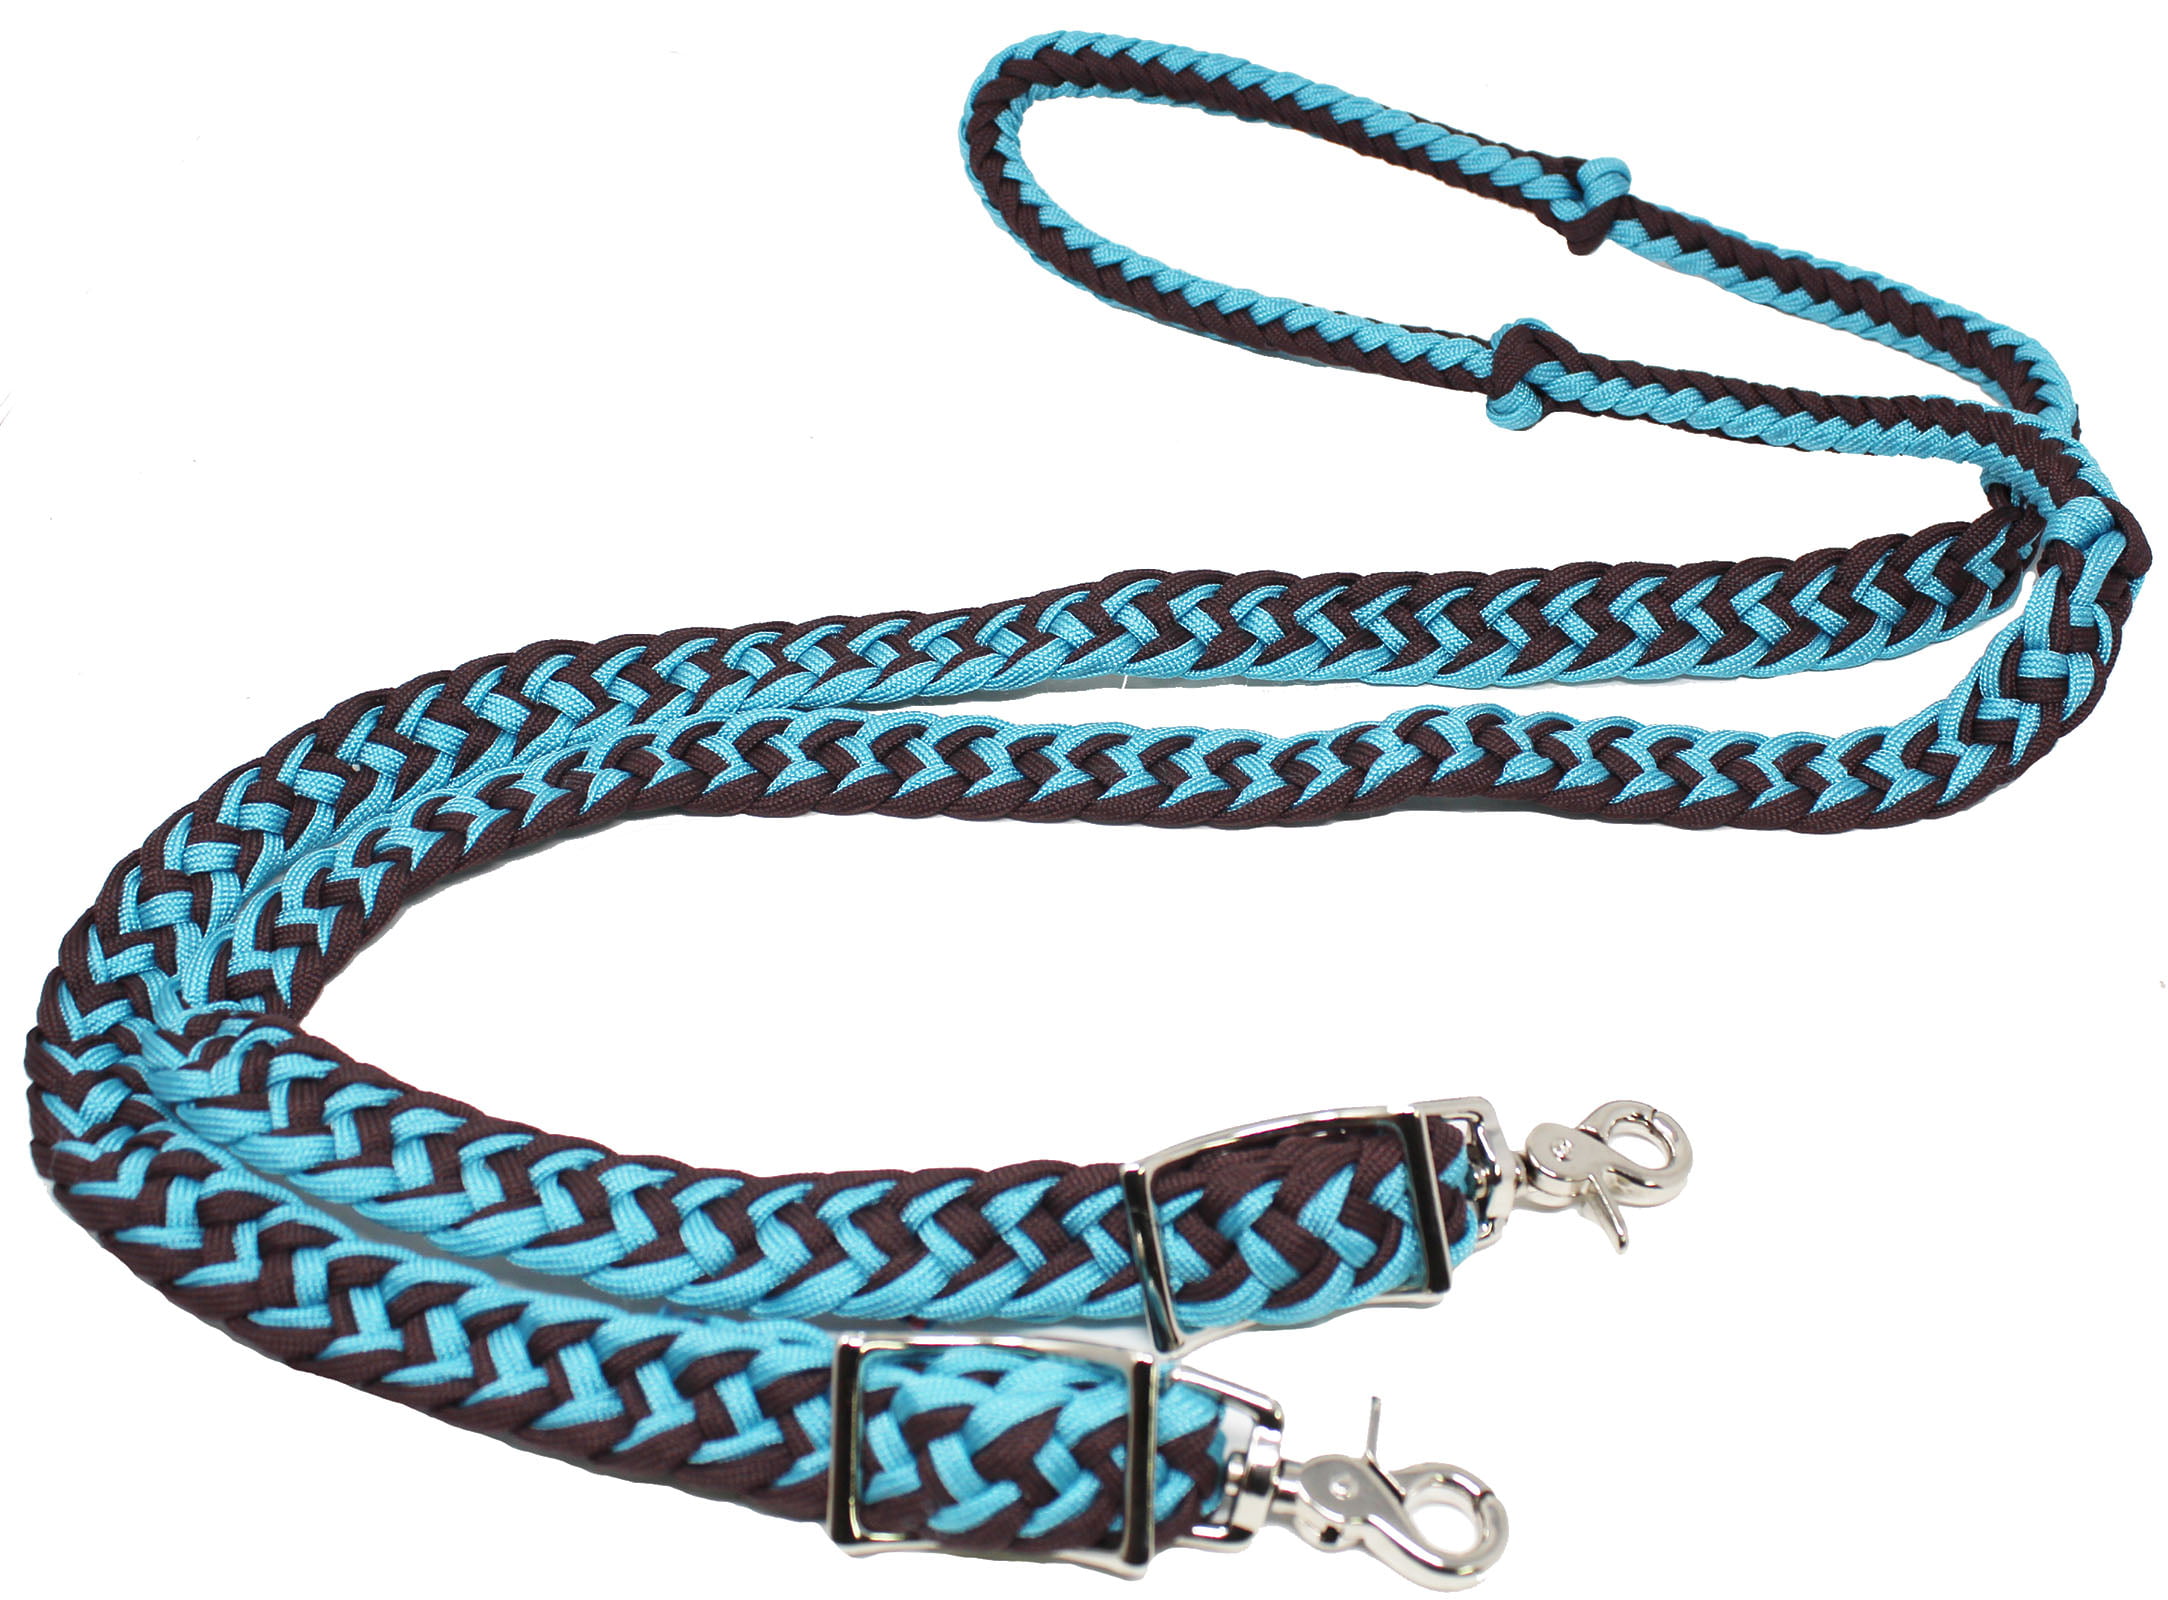 Horse Western Nylon Braided Knotted Roping Barrel Reins Turquoise Brown 60717 